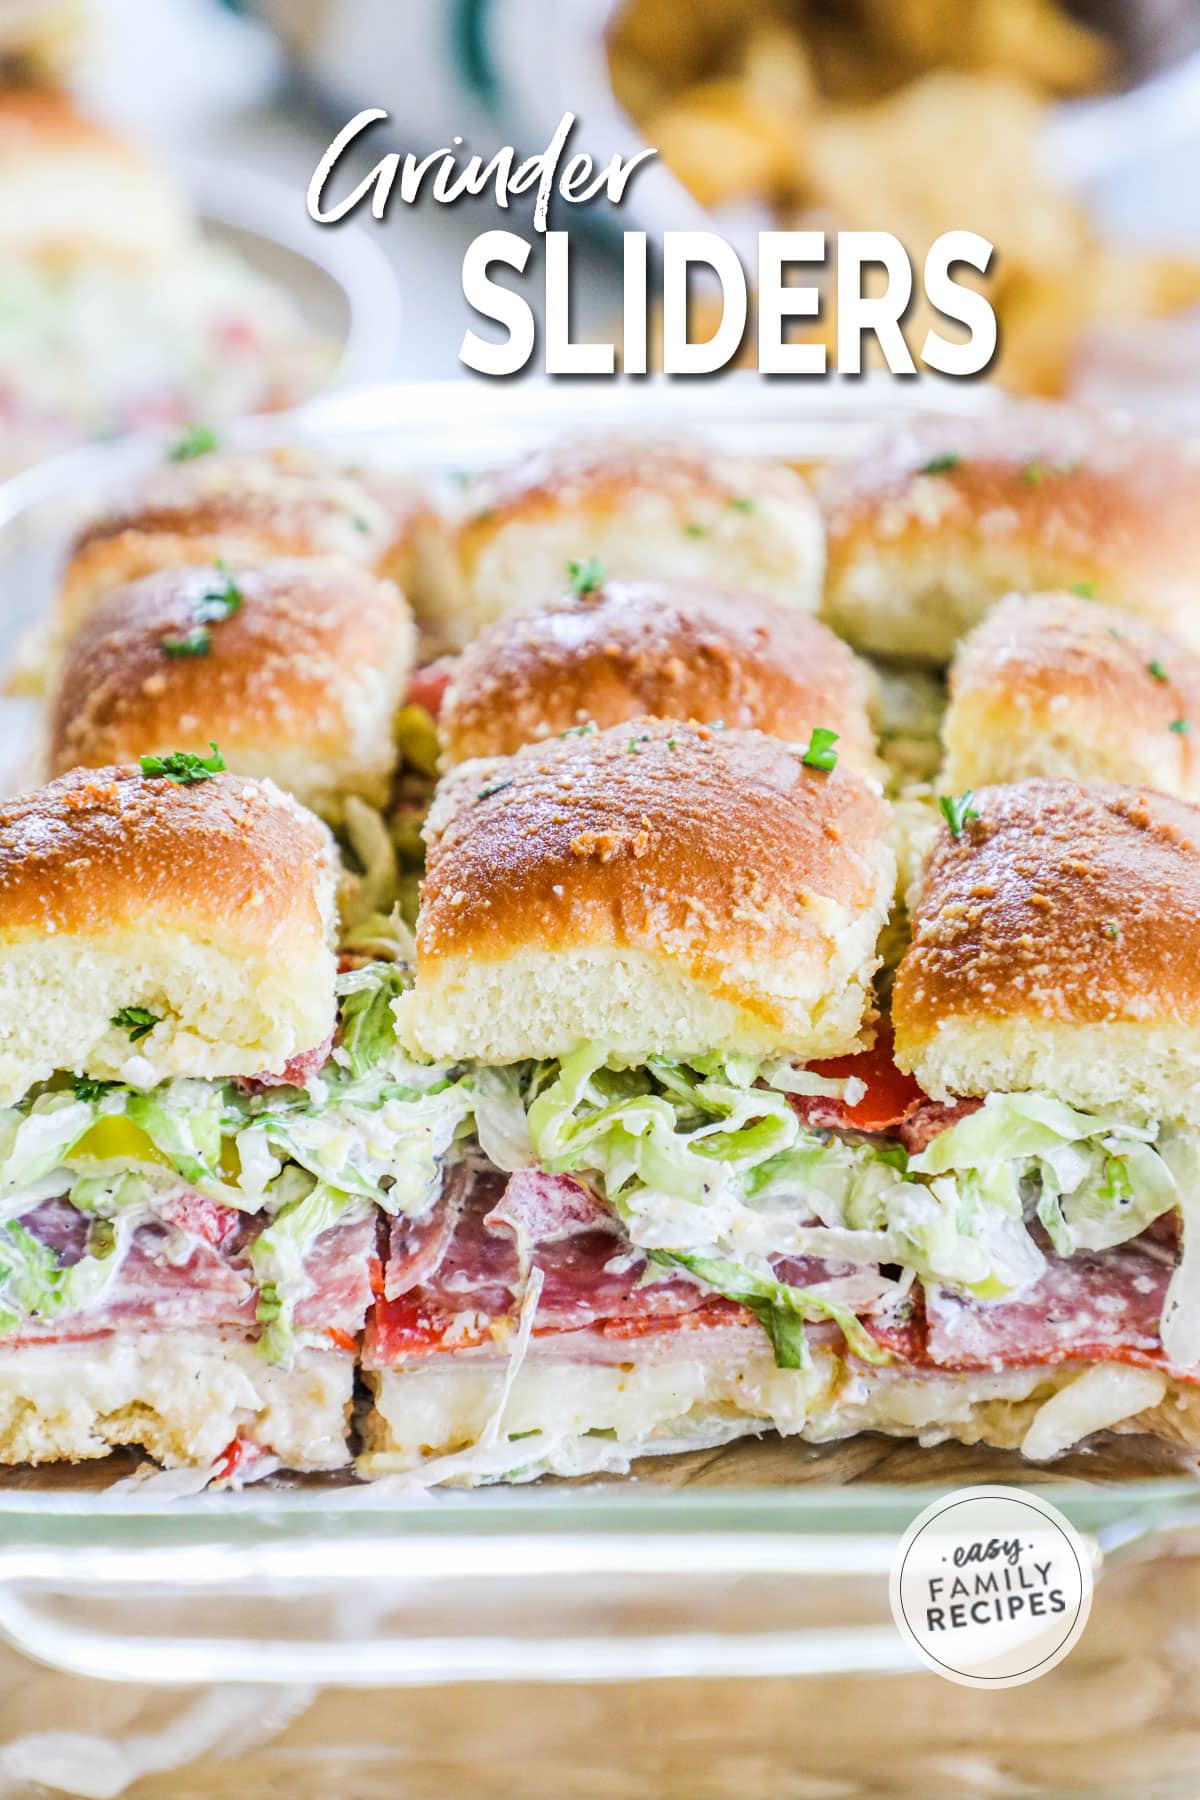 Italian grinder sliders layered with cheese, deli meat, and a dressed shredded salad with crisp top buns.